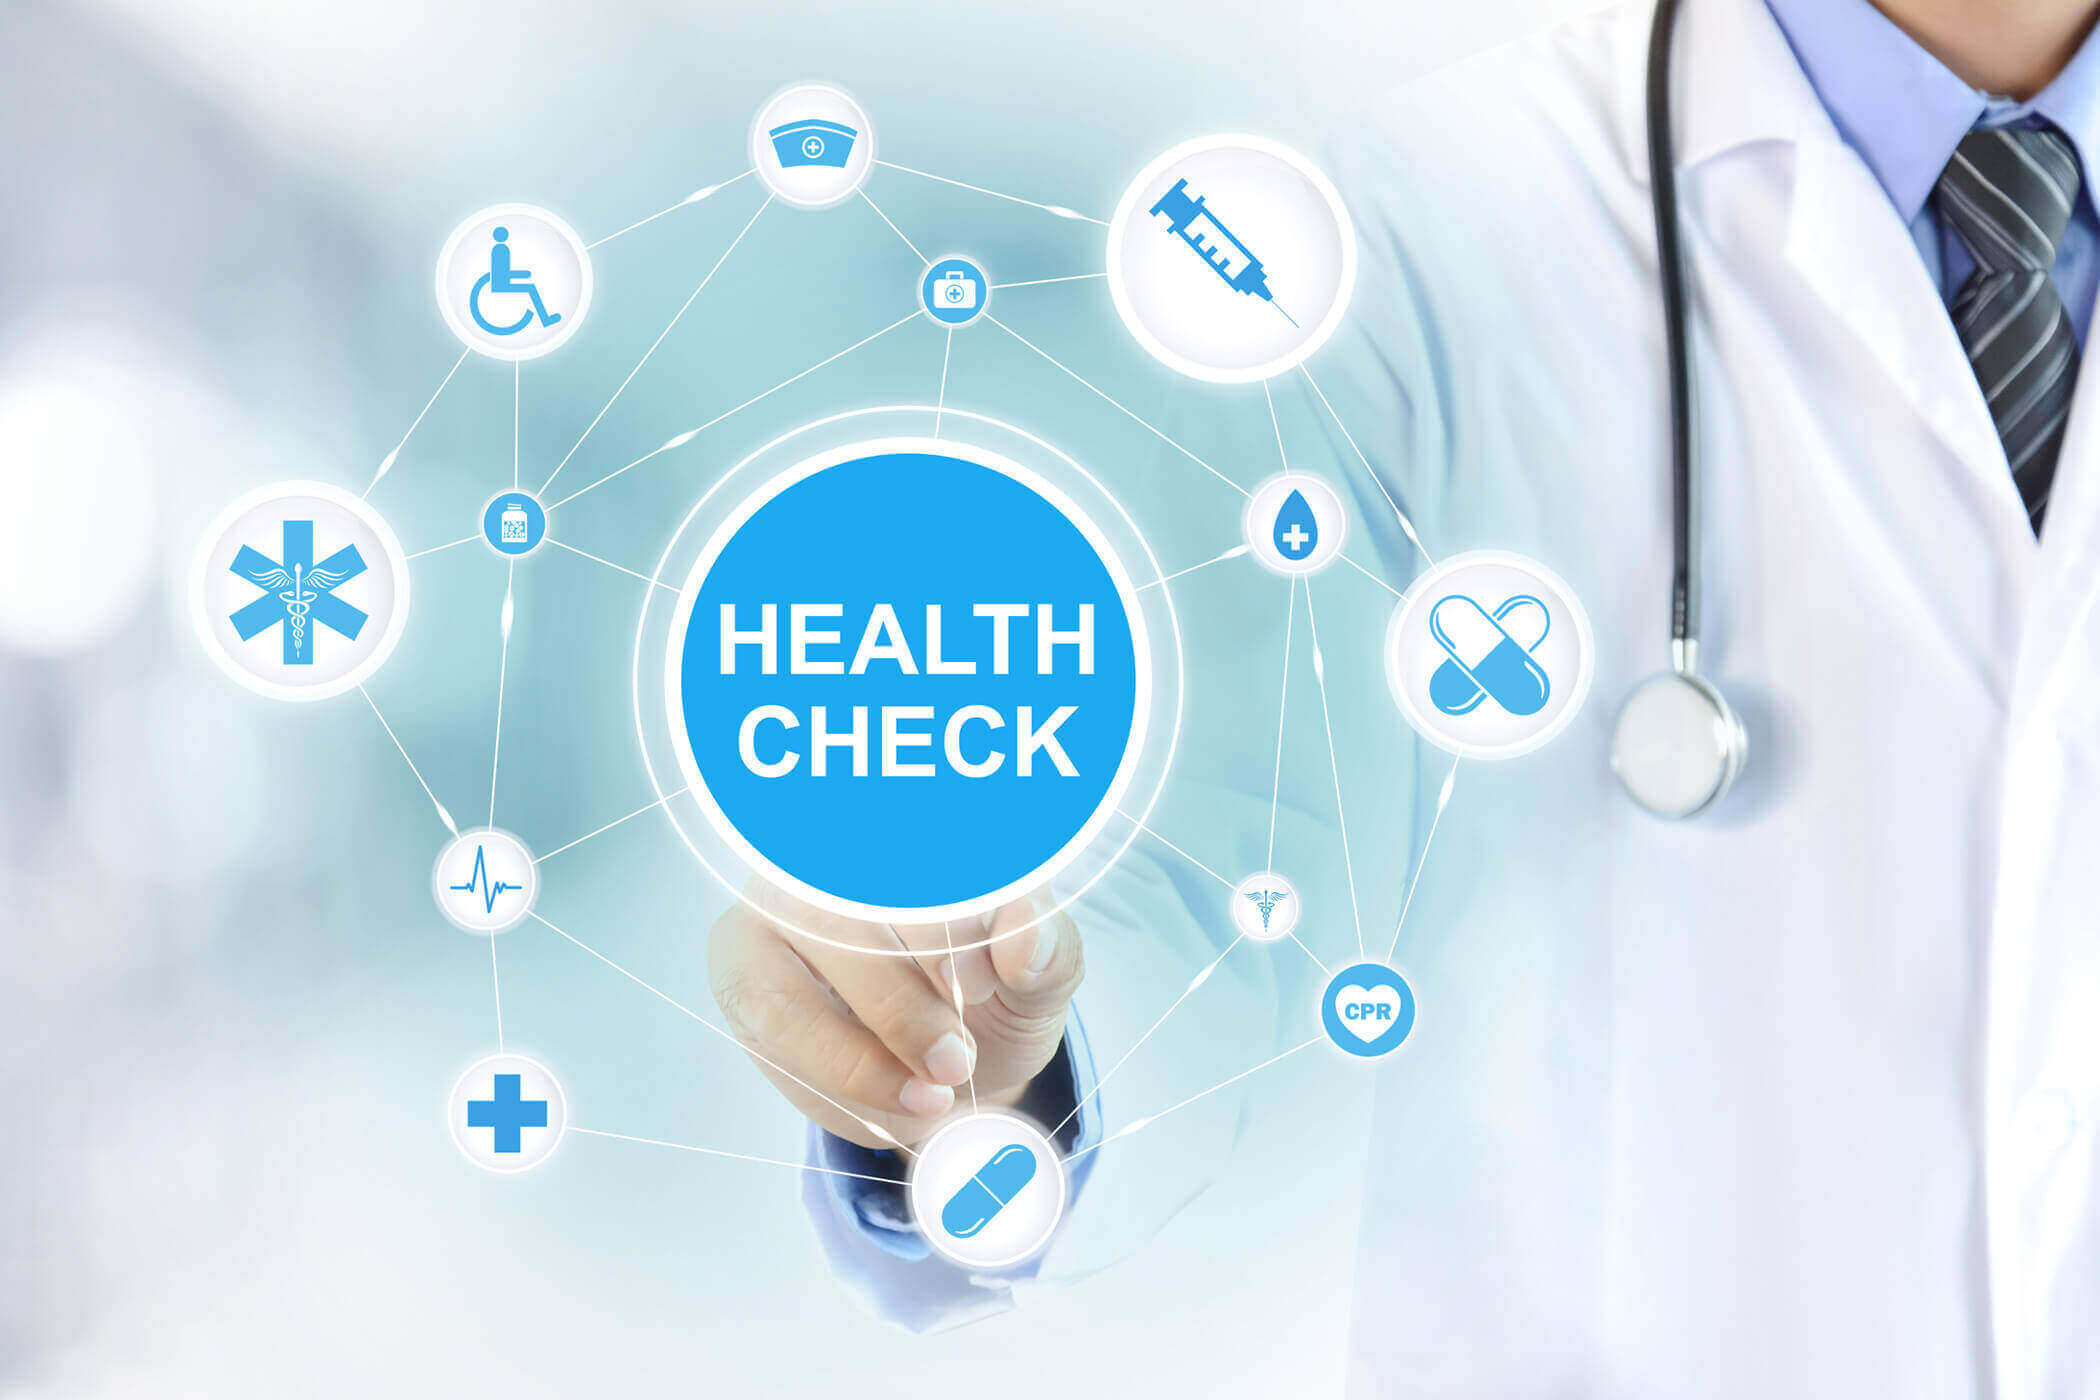 Health Checkup Packages